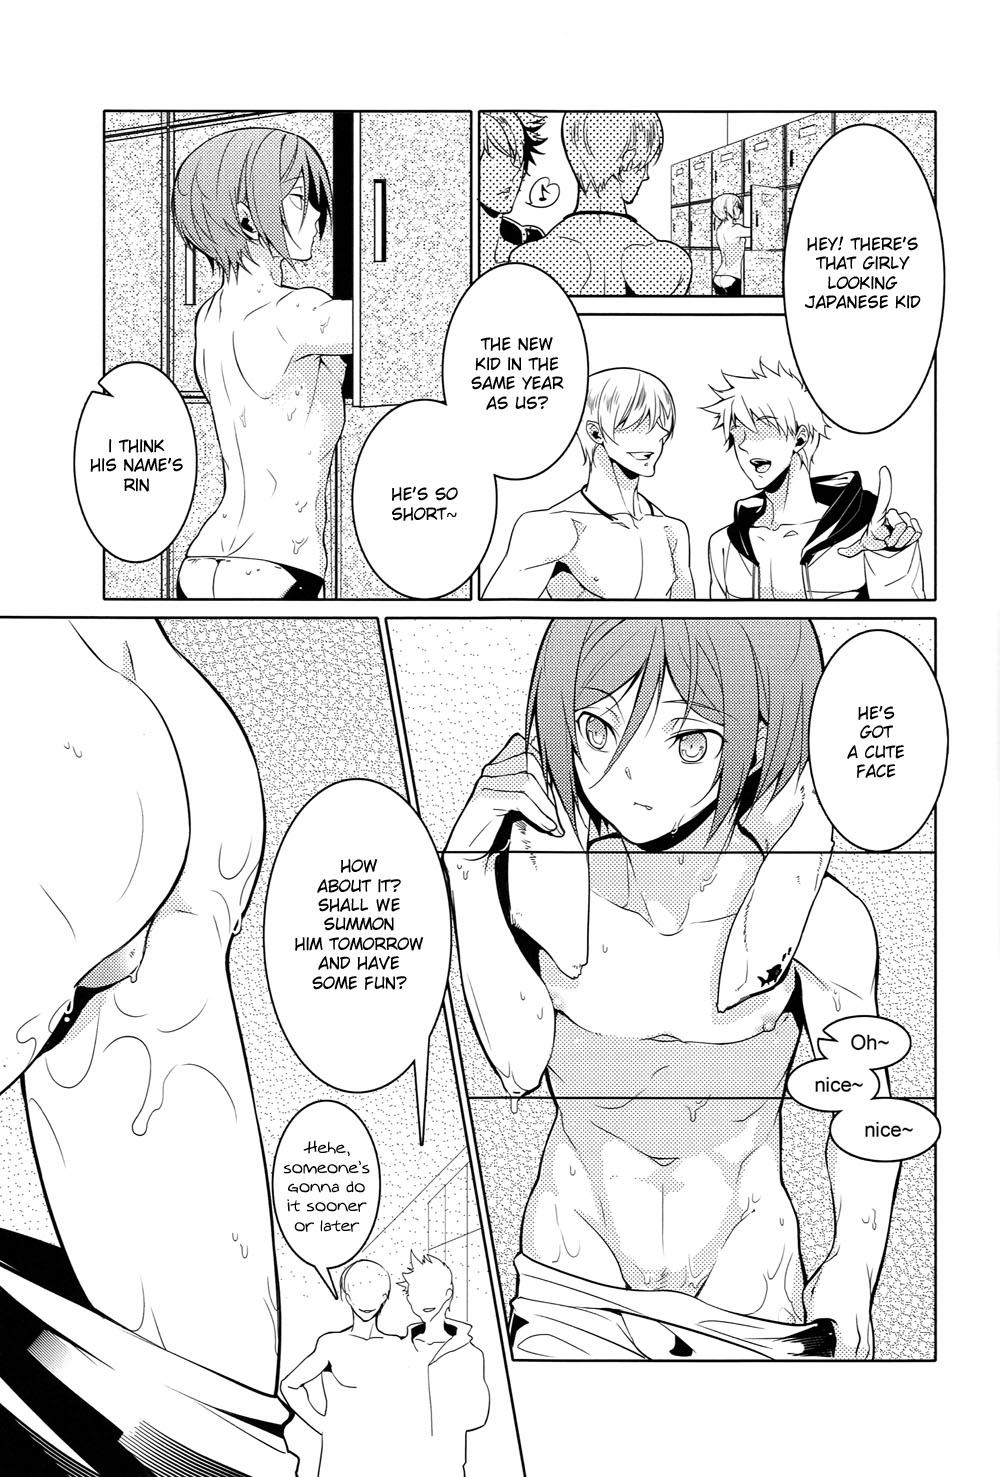 Double Penetration Rin-chan! Ganbare!! - Free Chilena - Page 6